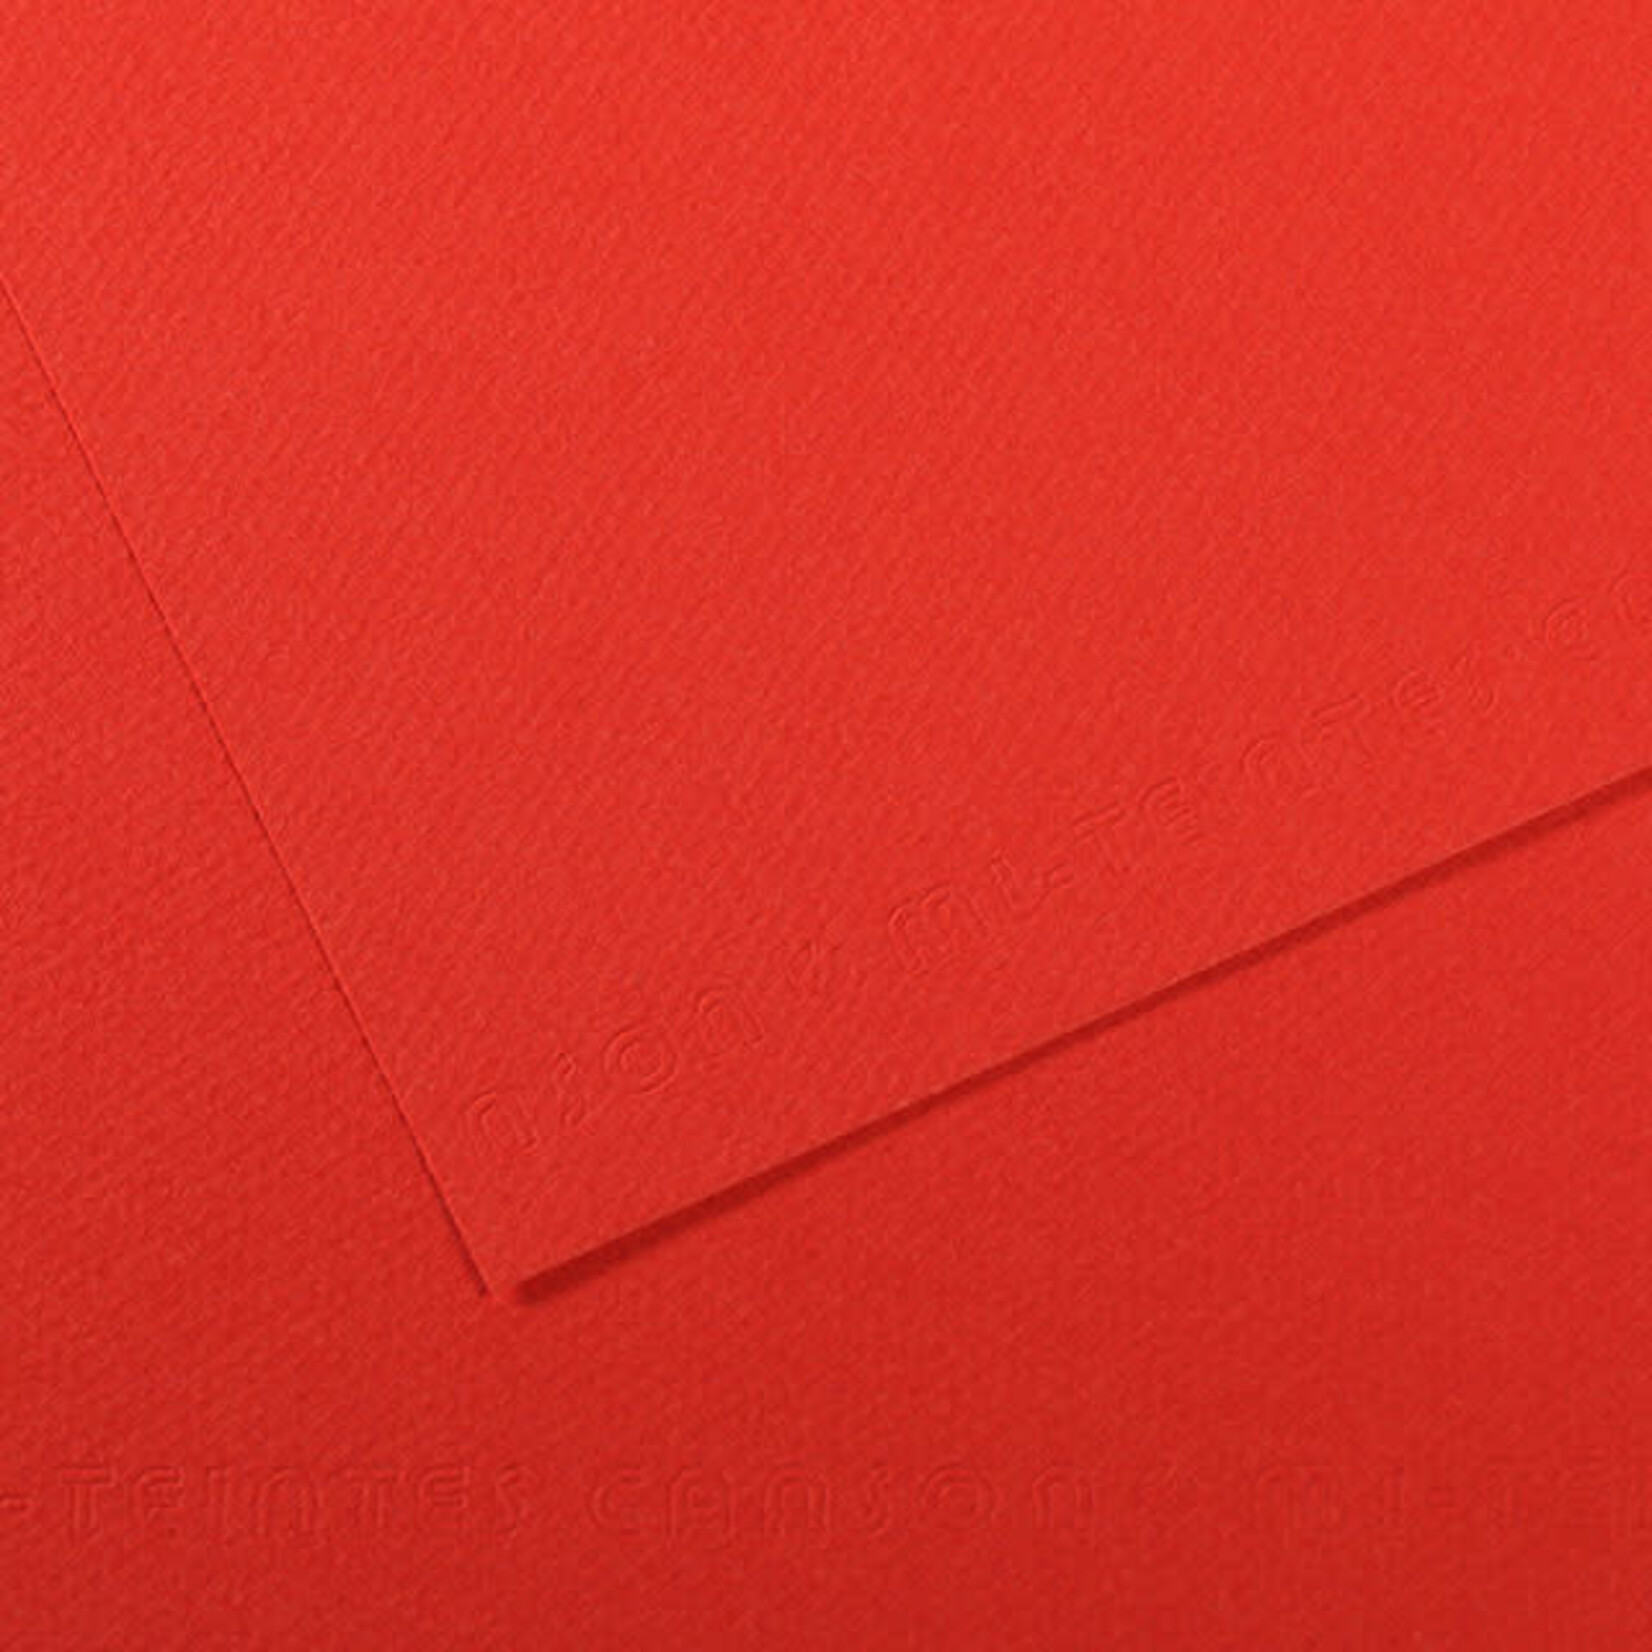 Canson Mi-Teintes Paper Sheets, 19'' x 25'', Poppy Red